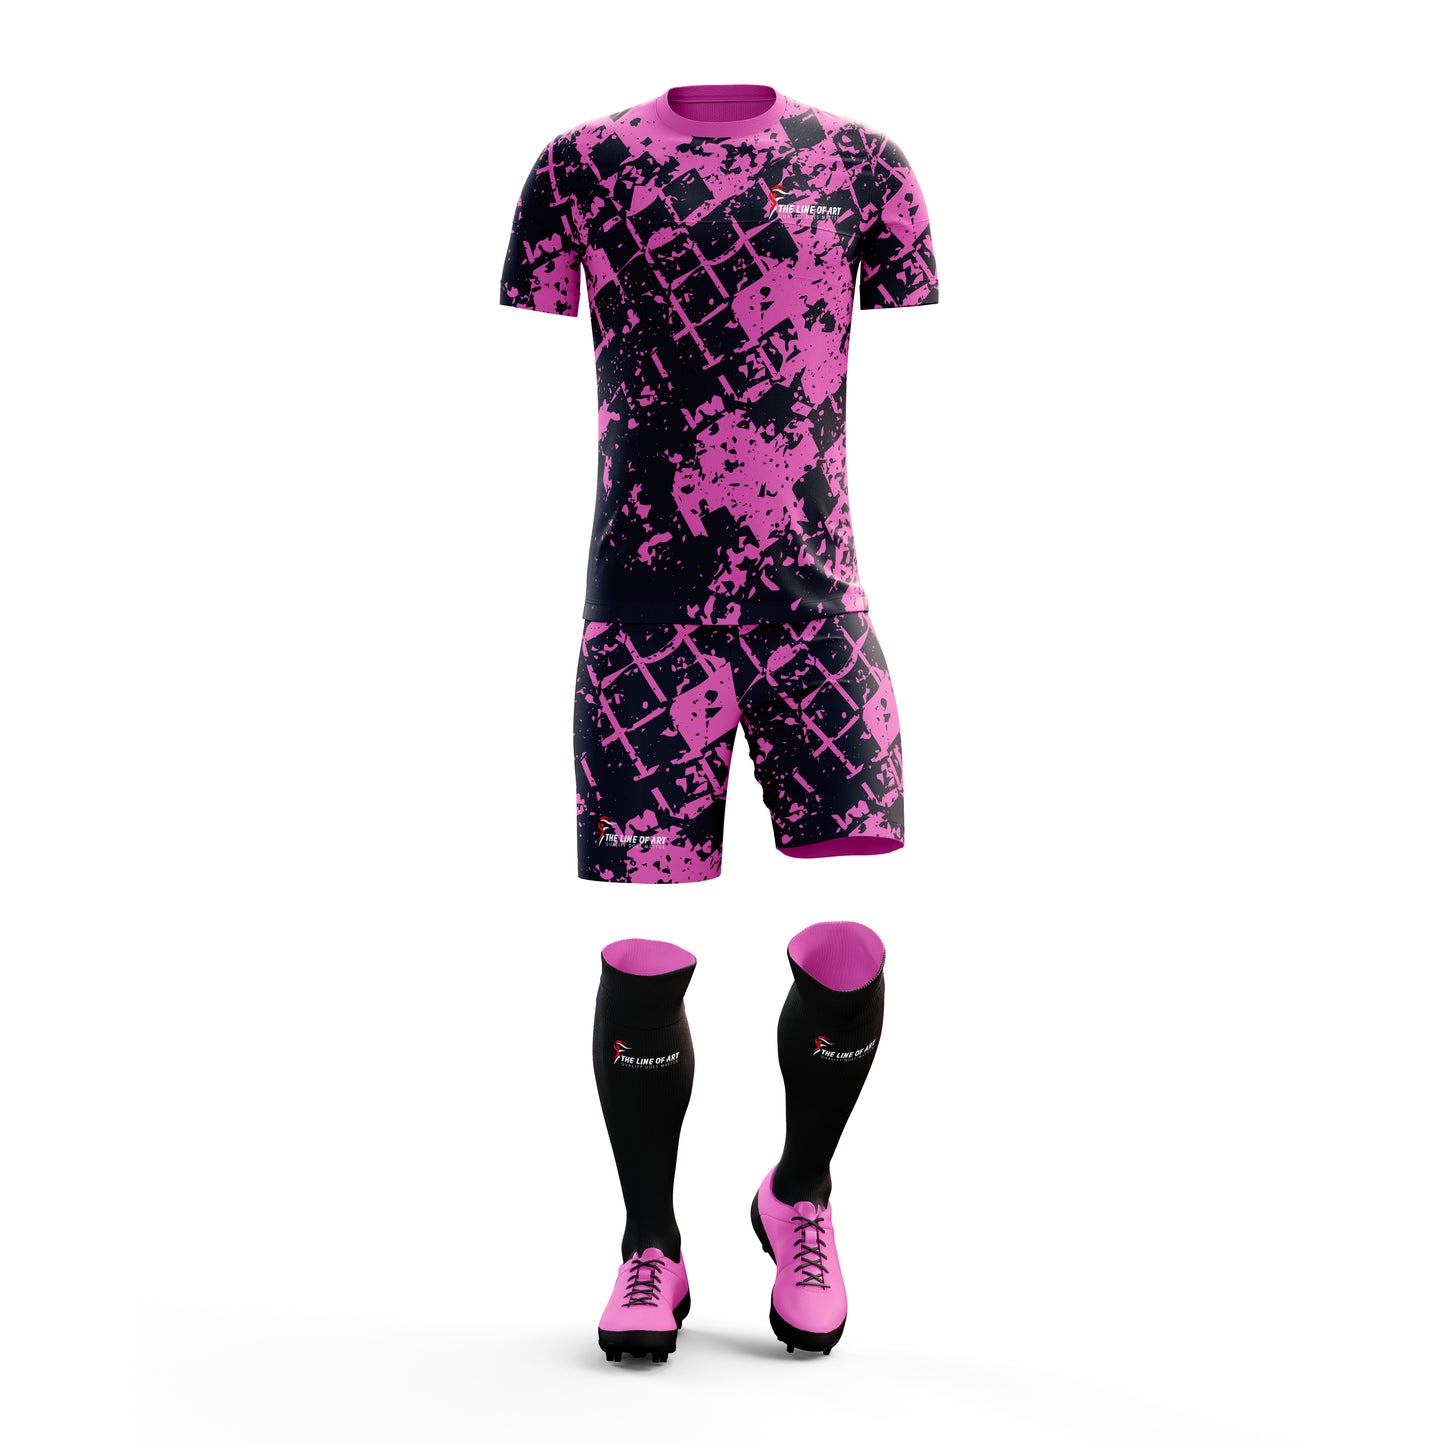 Soccer Uniforms Sets With Jersey & Shorts Sublimated Design Half Sleeves With O Neck